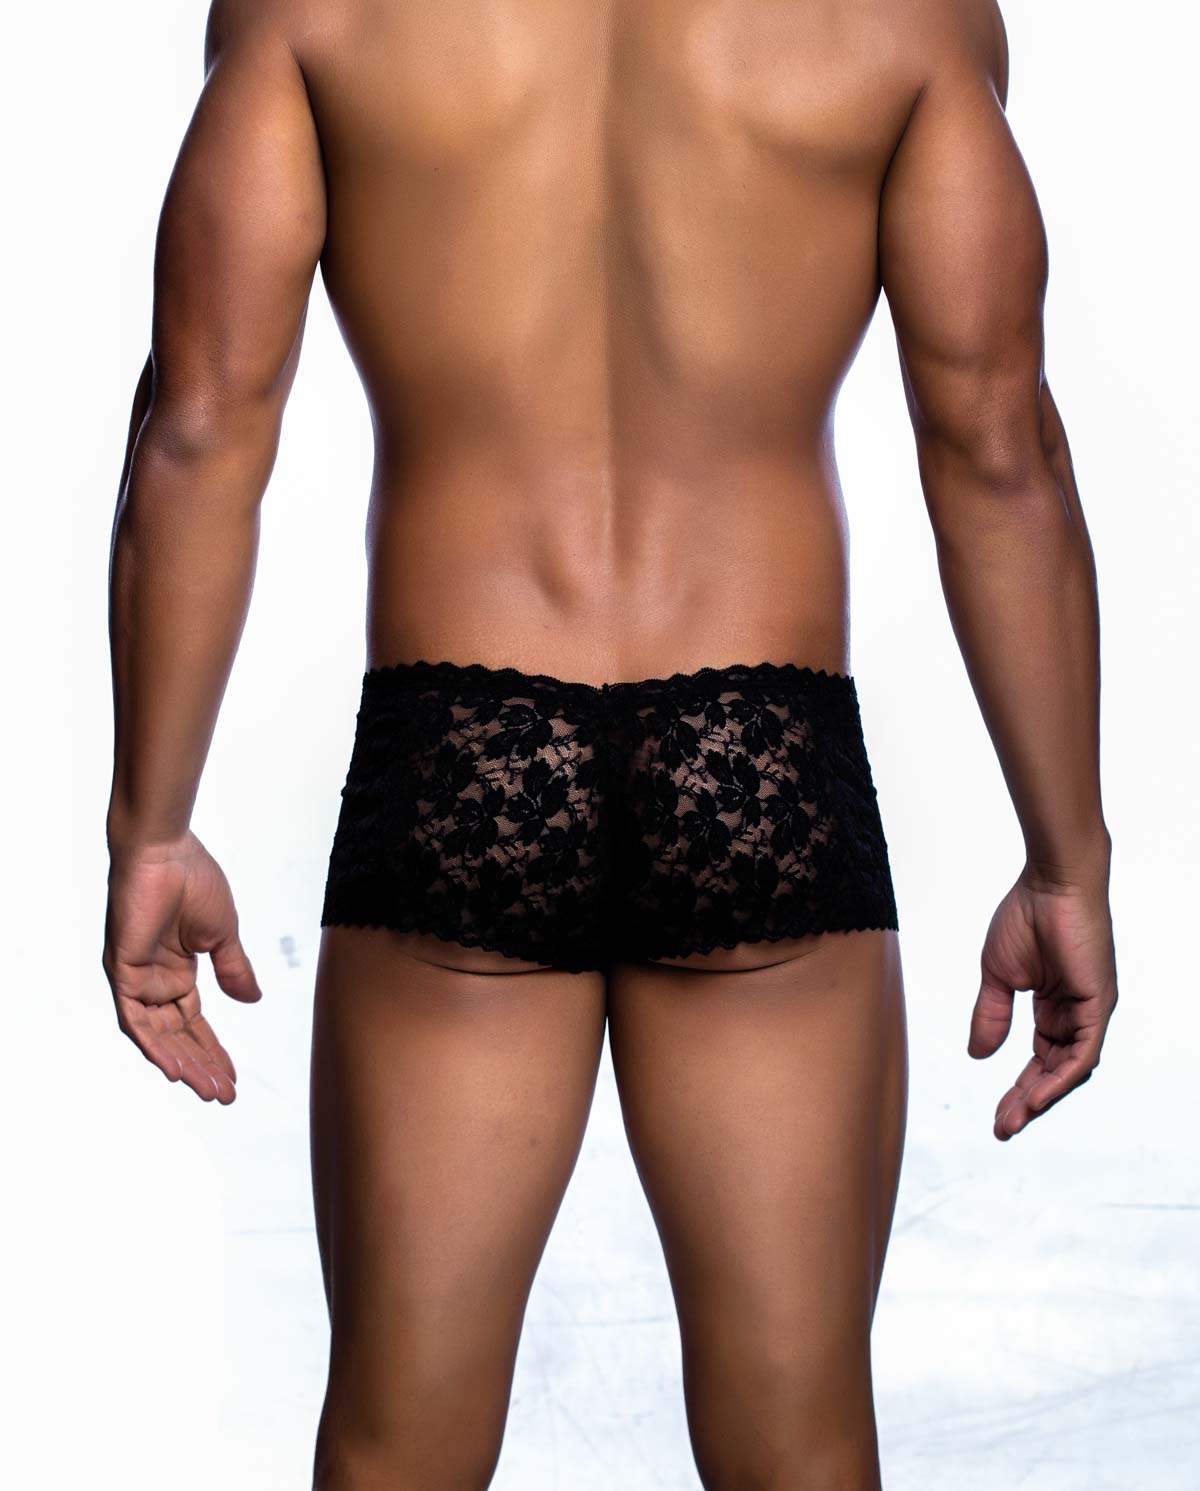 MOB Men's Lace Boxer Shorts available at www.MensUnderwear.io - 1